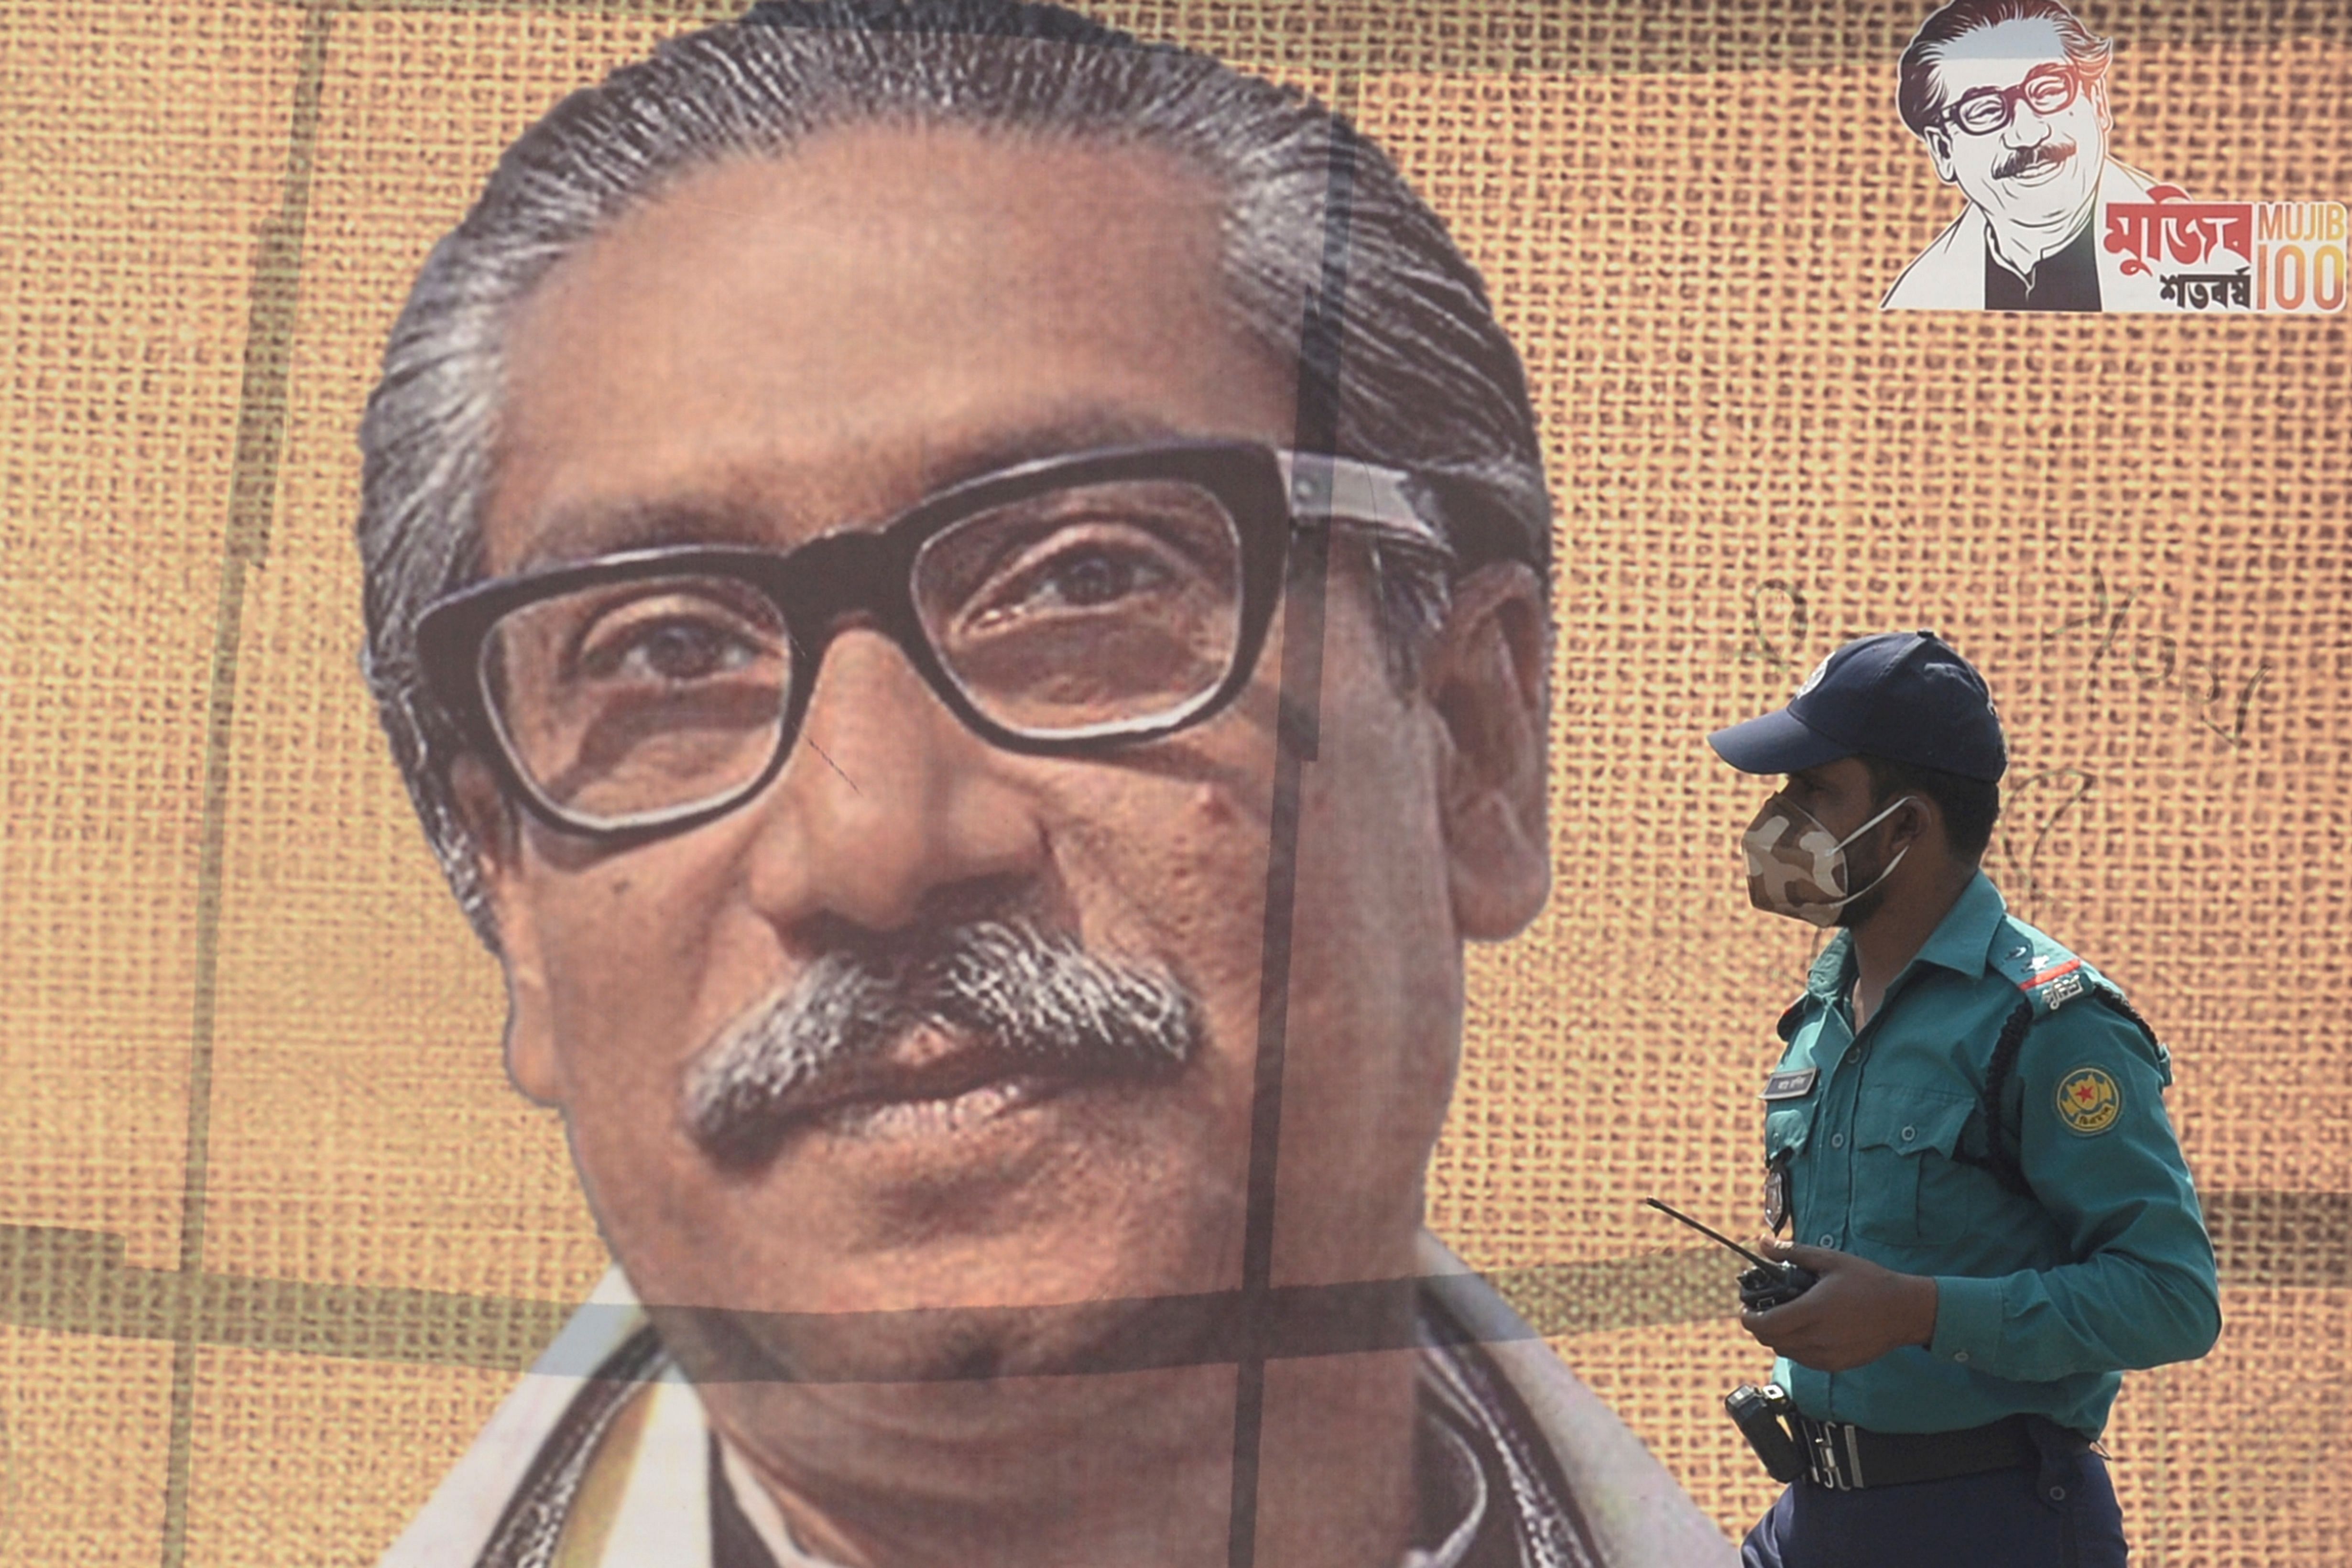 A policeman wearing a facemask amid fears of the spread of COVID-19 novel coronavirus, walks past a banner with a picture of Bangladesh’s founder Sheikh Mujibur Rahman. (AFP Photo)